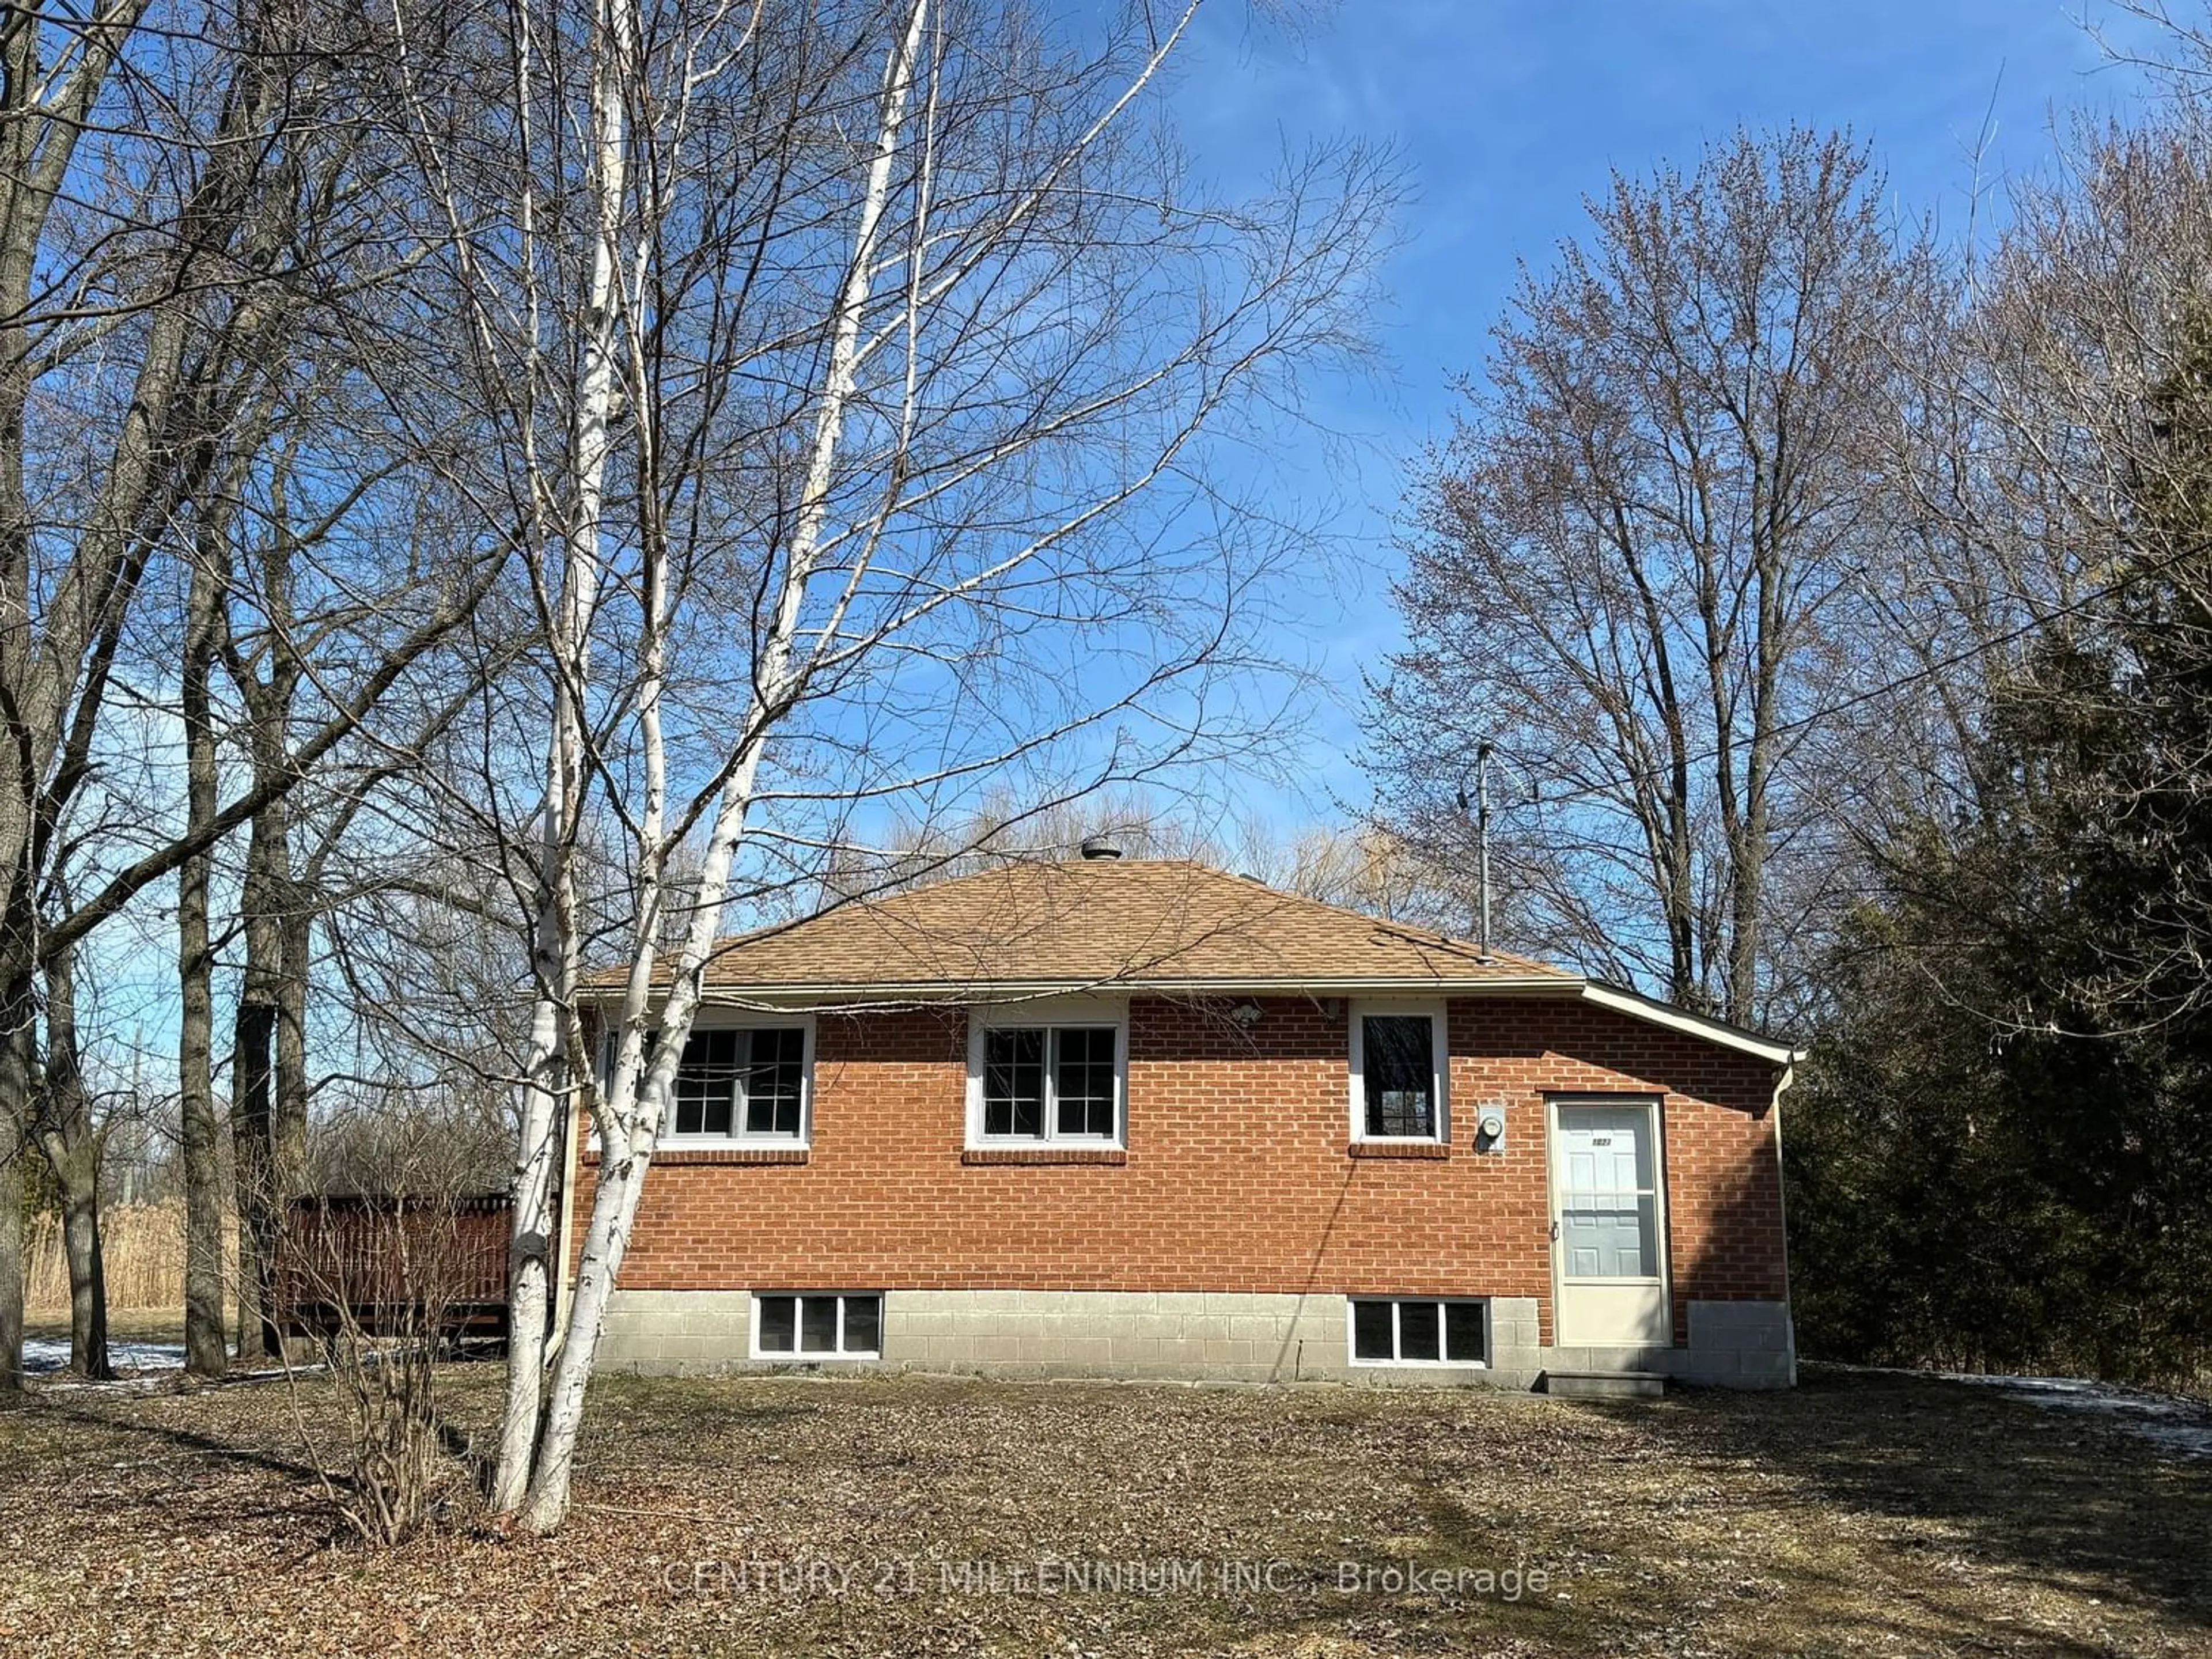 Frontside or backside of a home for 1027 Chapman St, Innisfil Ontario L0L 1W0